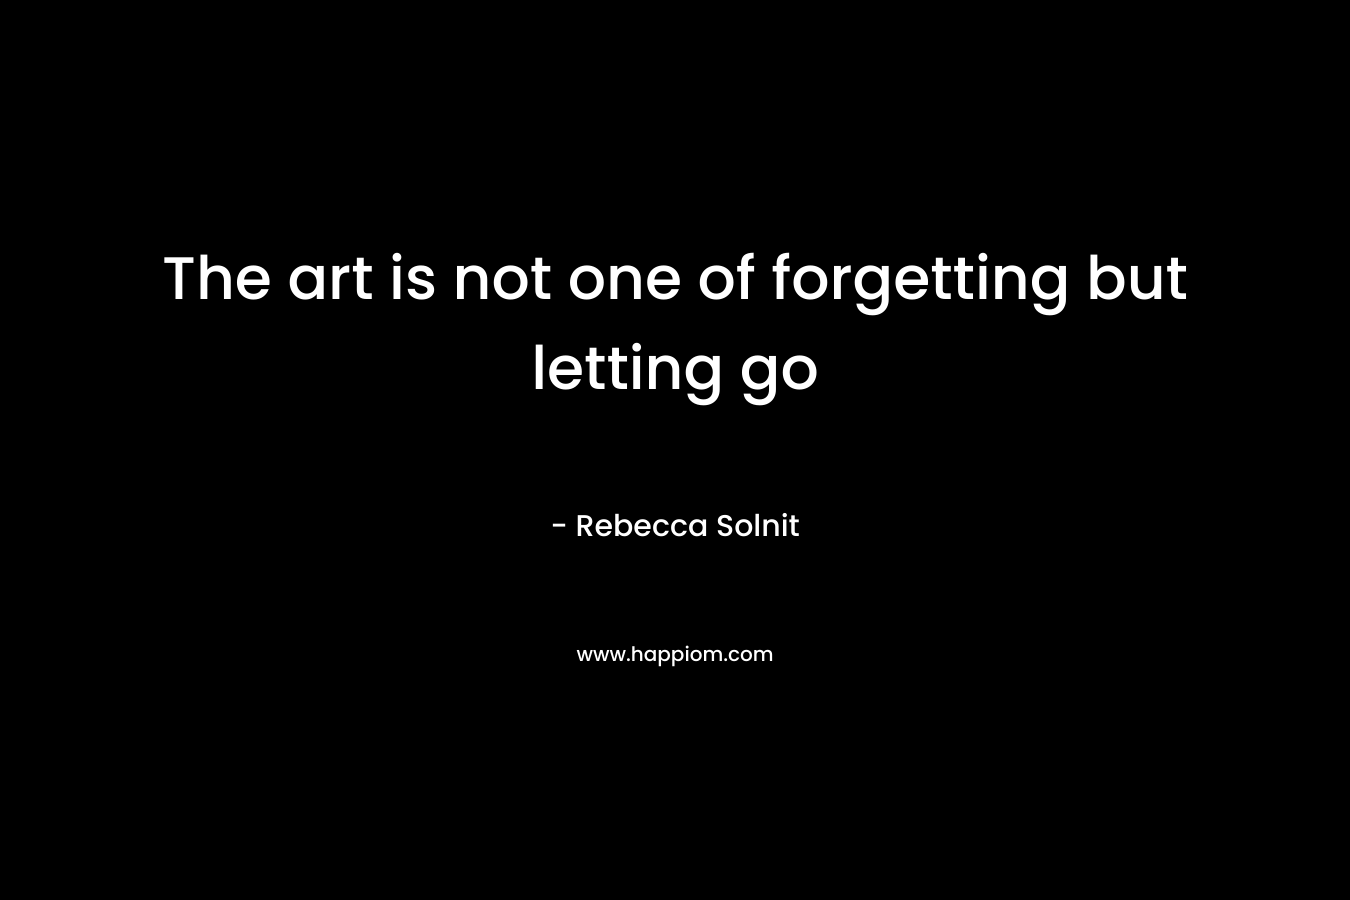 The art is not one of forgetting but letting go